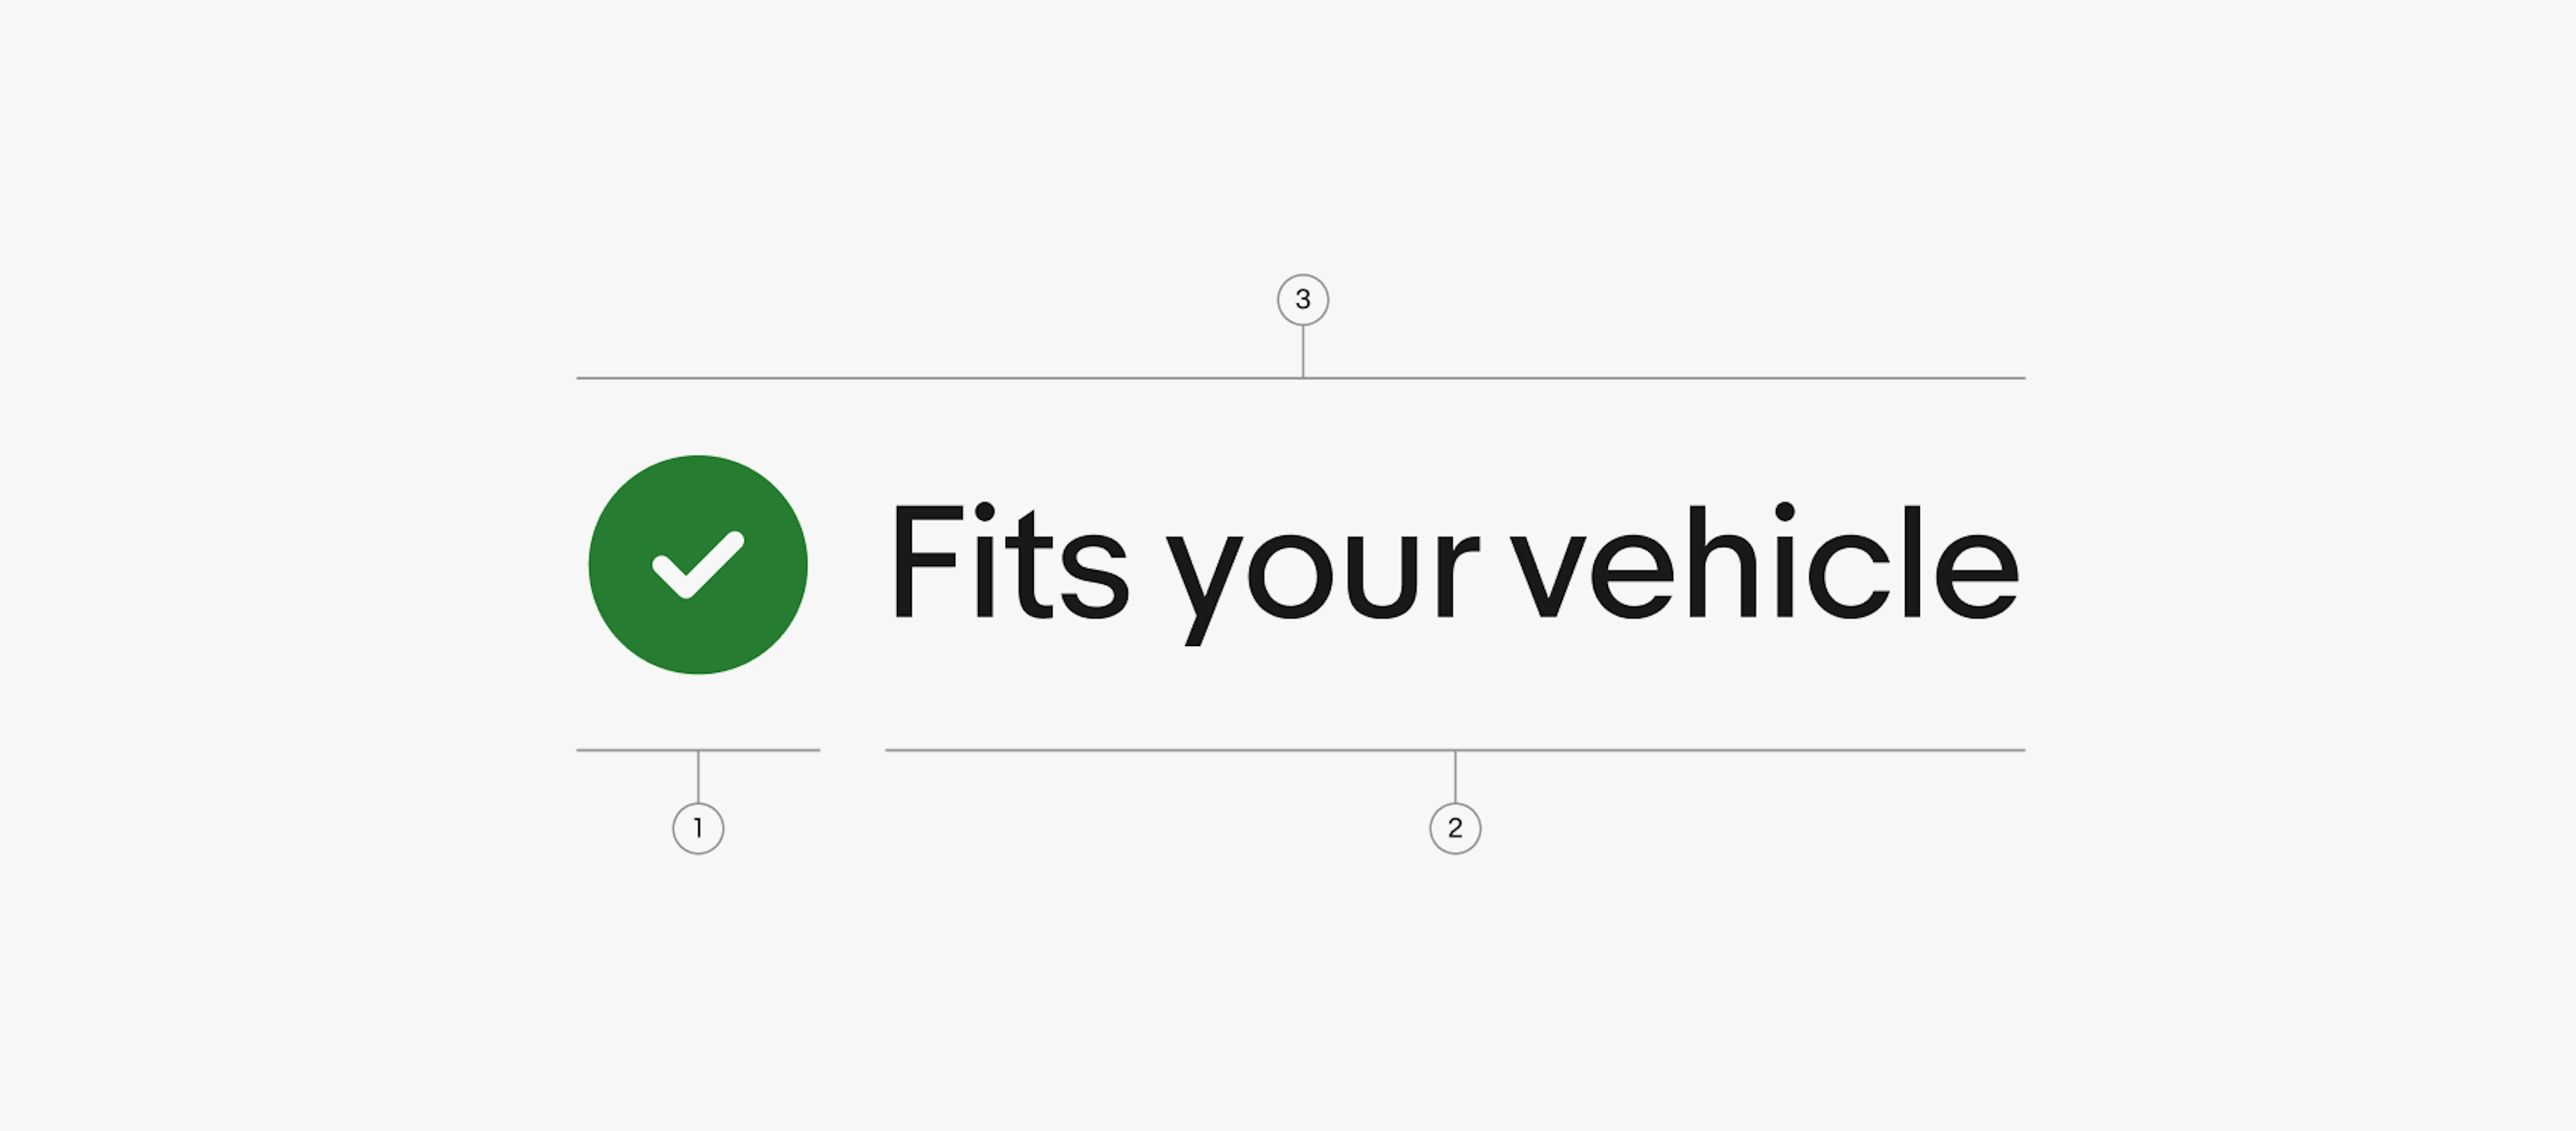 A detailed spec of a confirmation indicator lockup. Number 1 points to the confirmation filled icon. Number 2 points to the confirmation text “Fits your vehicle”. Number 3 points to the full lockup.